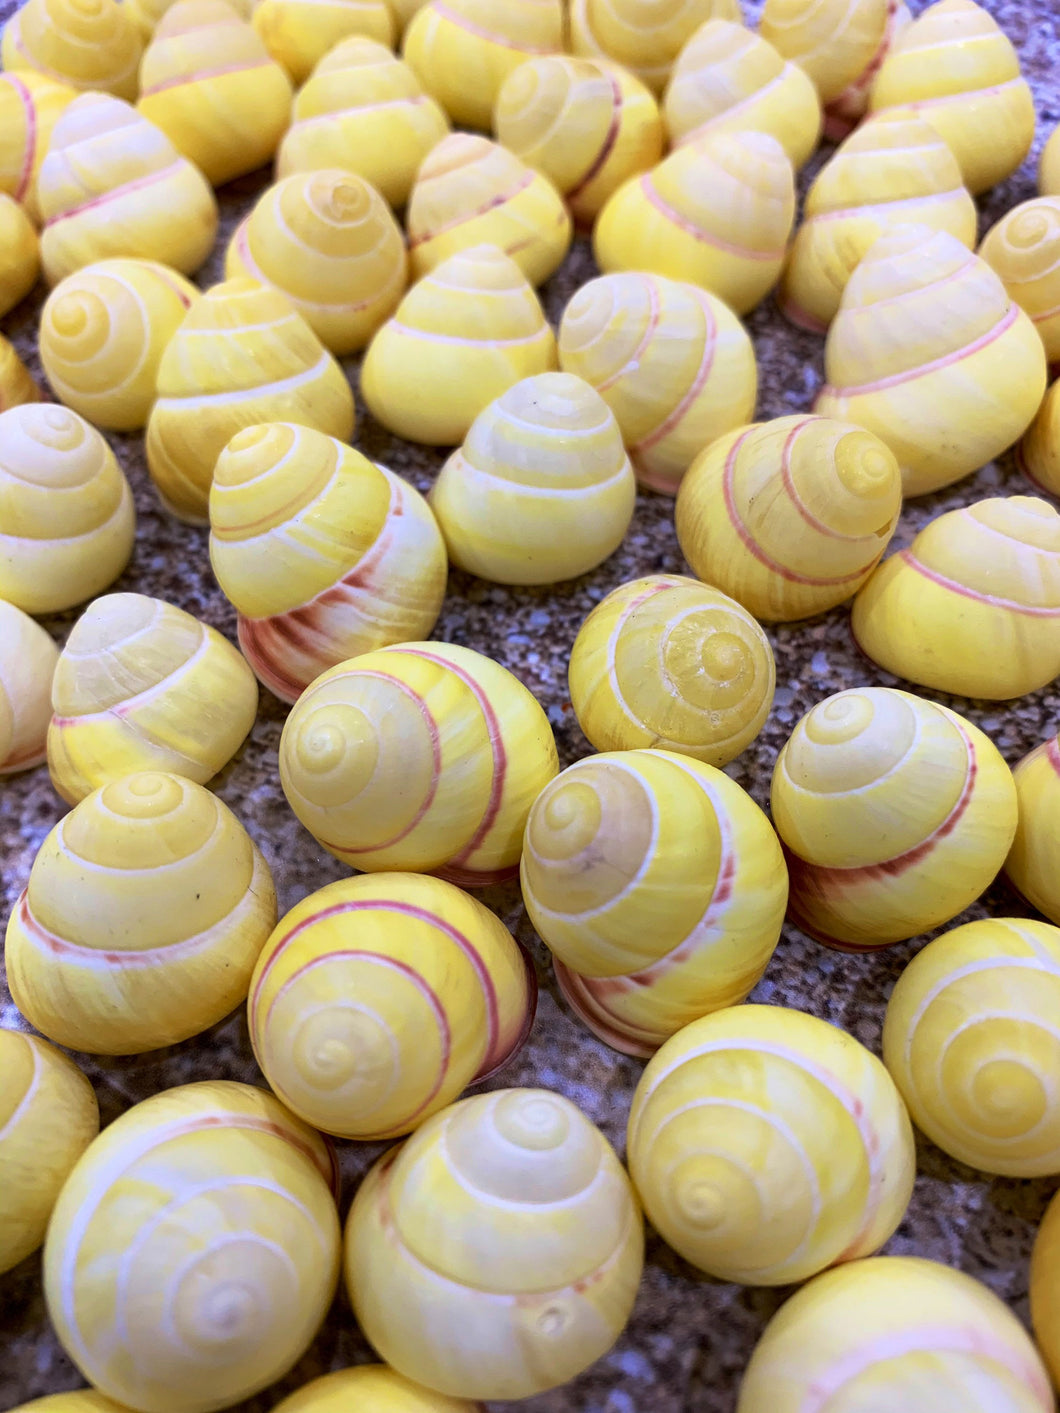 Land Snail-Striped Yellow Land Snail Shells-Safe for Hermit Crabs-Hermit Crab Shells-Turbo Shells-Hermit Crab Tank Decor-FREE SHIPPING!